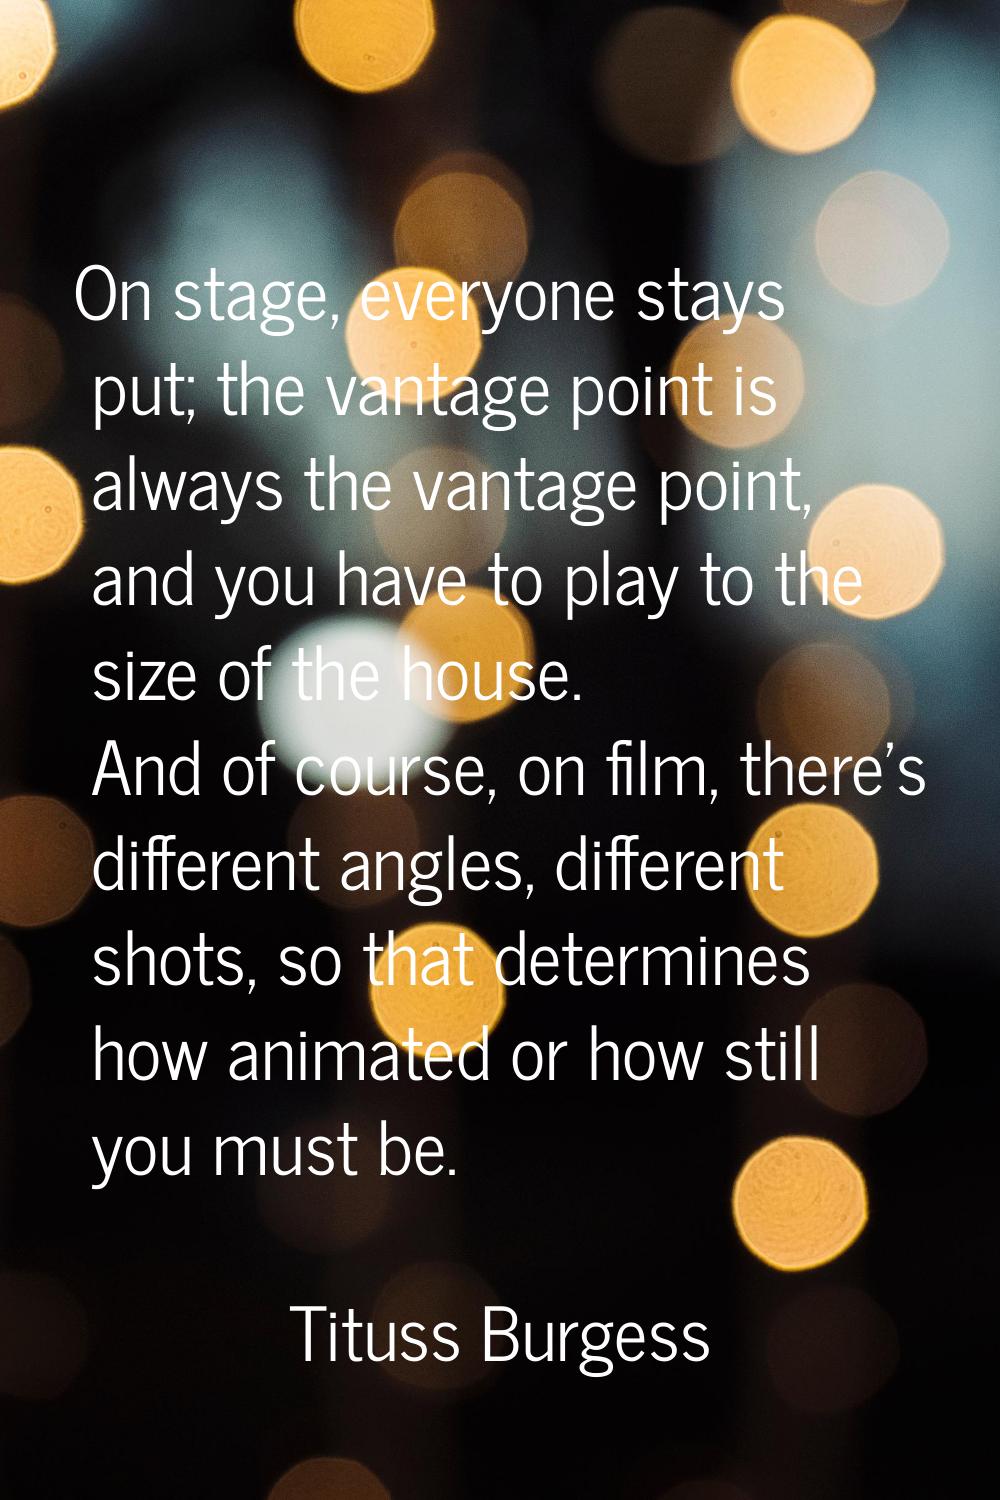 On stage, everyone stays put; the vantage point is always the vantage point, and you have to play t